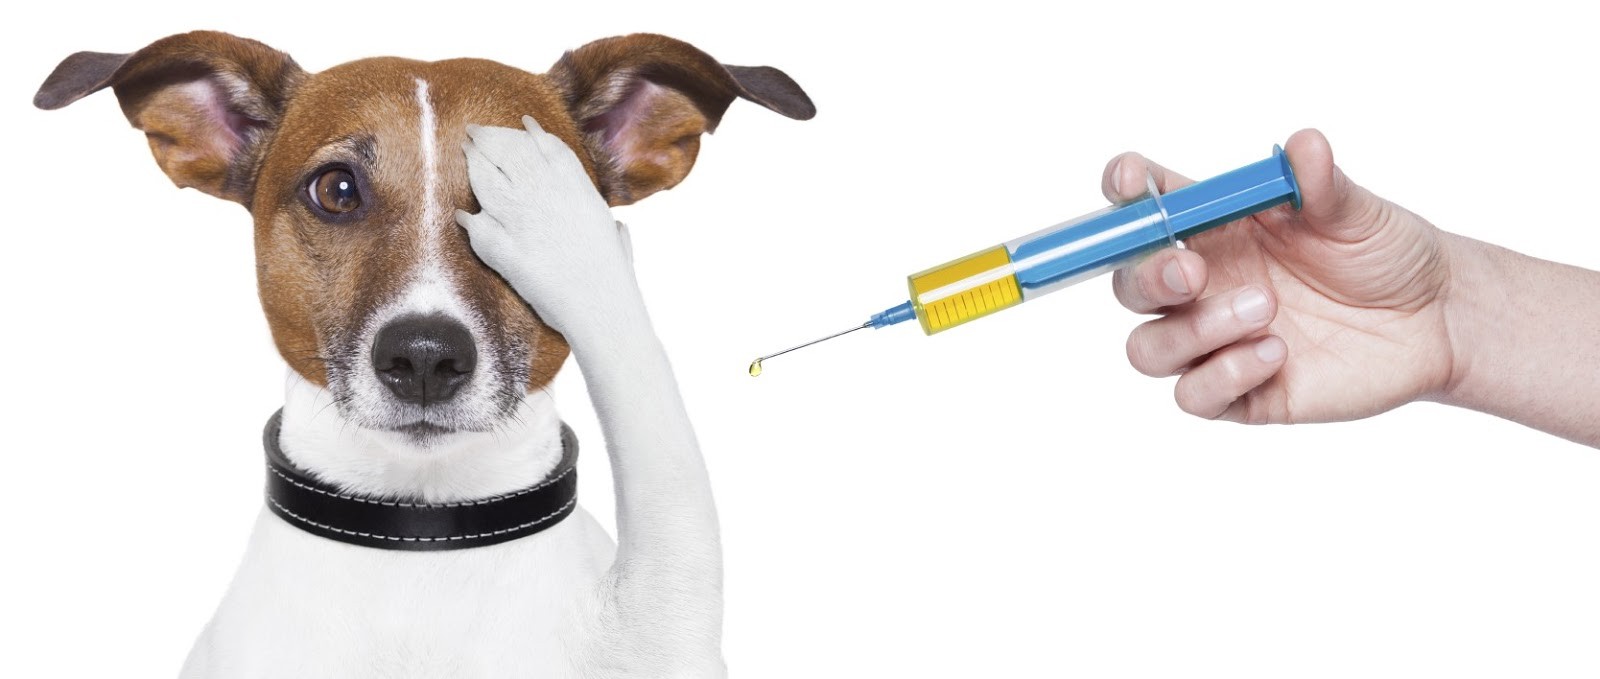 Importance of Vaccination and Canine Adenovirus Type 2 (CAV-2) Infection